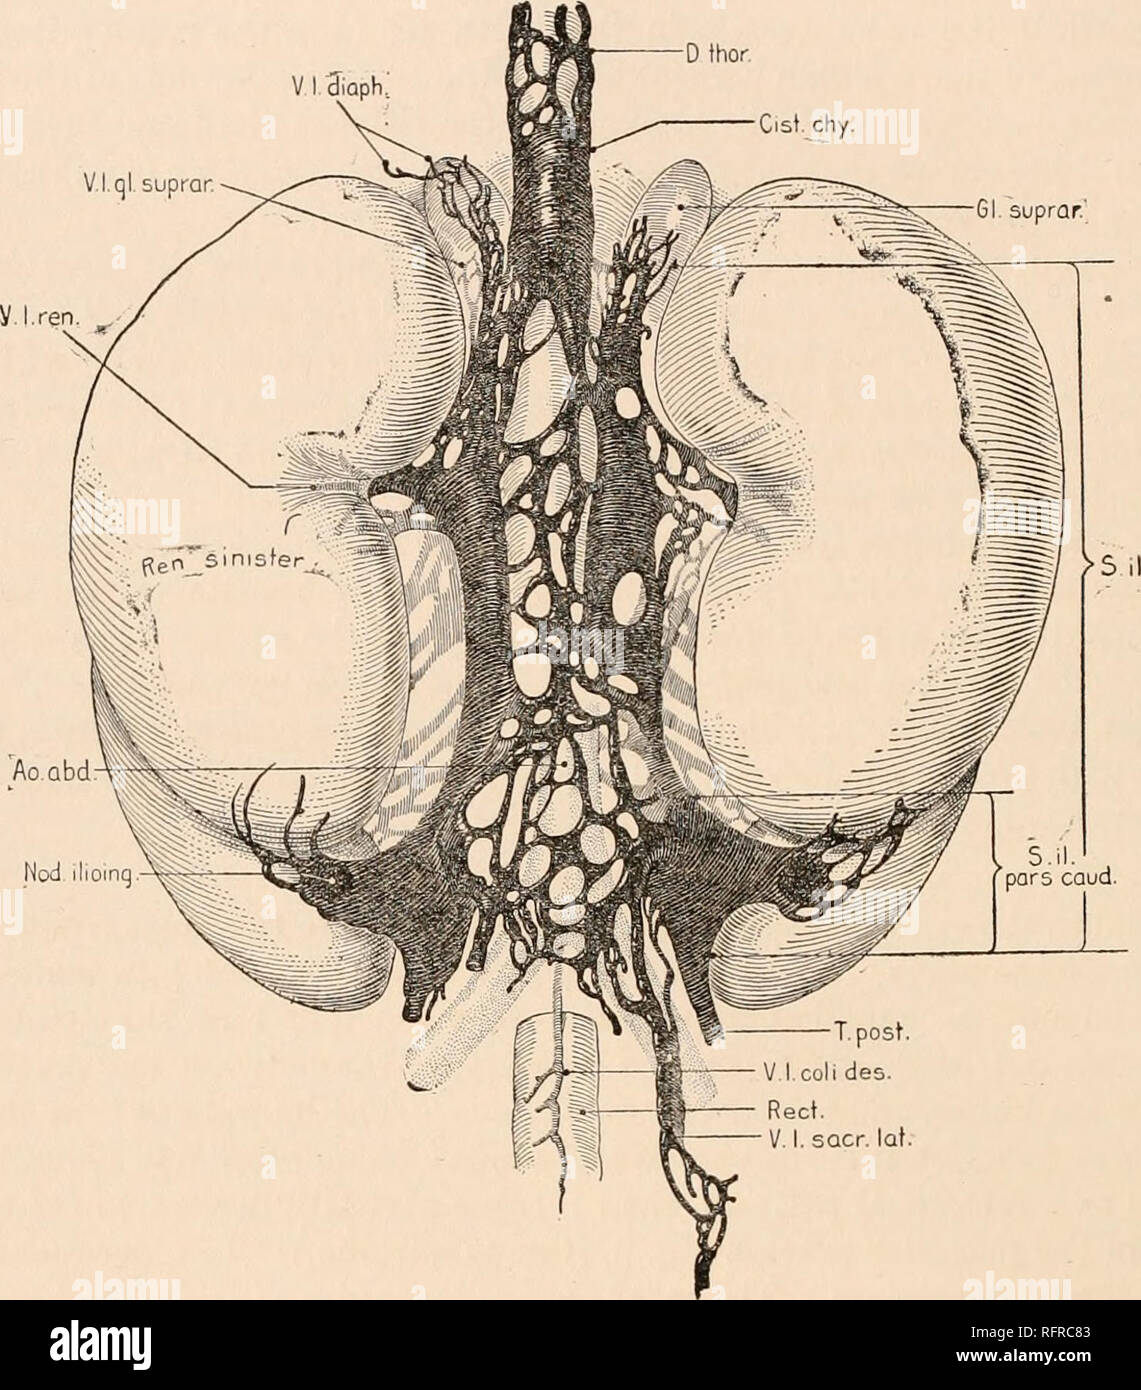 . Carnegie Institution of Washington publication. 28 FATE OF PRIMARY LYMPH-SACS IN ABDOMINAL REGION OF PIG, ETC. With the growth of the embryo these sacs come to lie entirely lateral to the aorta in approximation to and above the retroperitoneal sac, which likewise has become situated lateral to the aorta. These three sacs are connected by small channels which show in figures 2 and 4, and when they are transformed into lymph-glands the result is a rather confusing V I 3iaph D thor. V.l.ql. suprar. 61 suprar.' V.l.coli des. Rect. V. I. sacr. lot. Ao.abd Nod iliomqA FIG. 4.—Dorsal view of specim Stock Photo